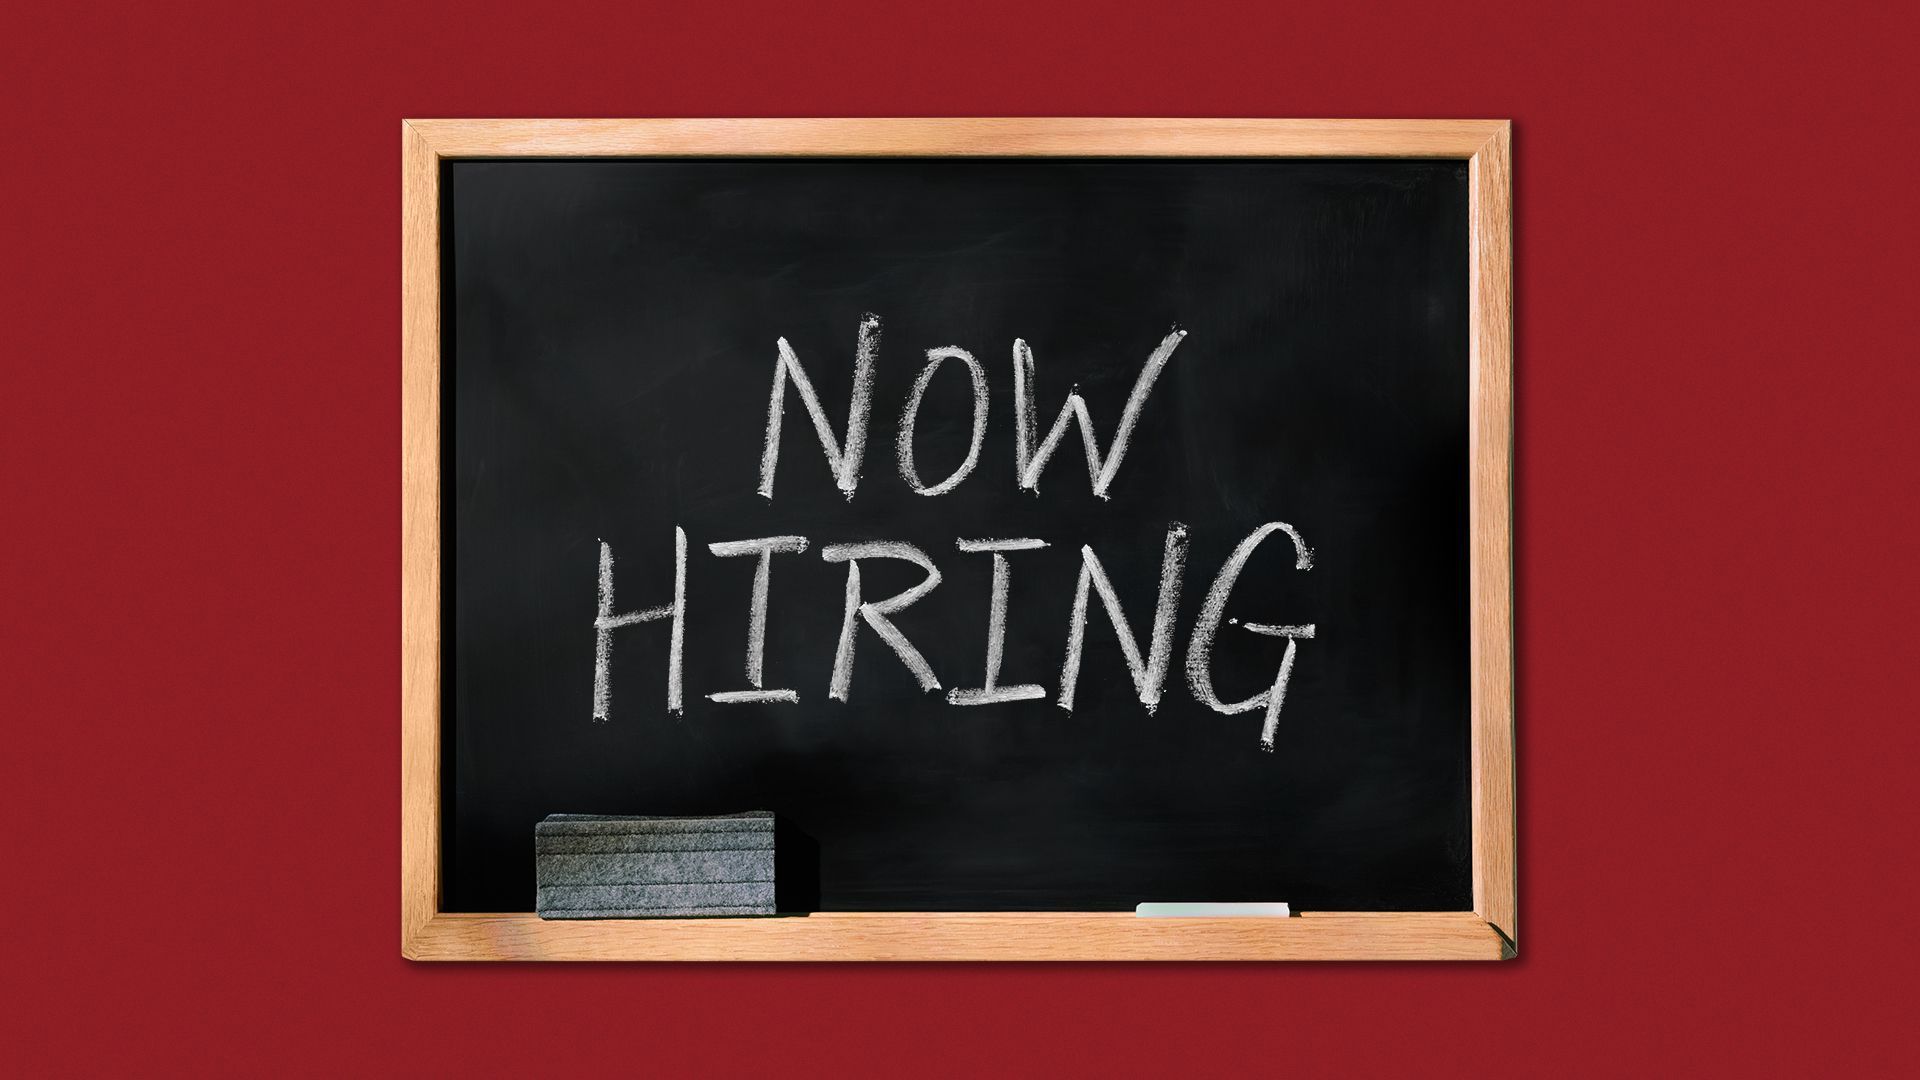 Illustration of a chalkboard that says Now Hiring.